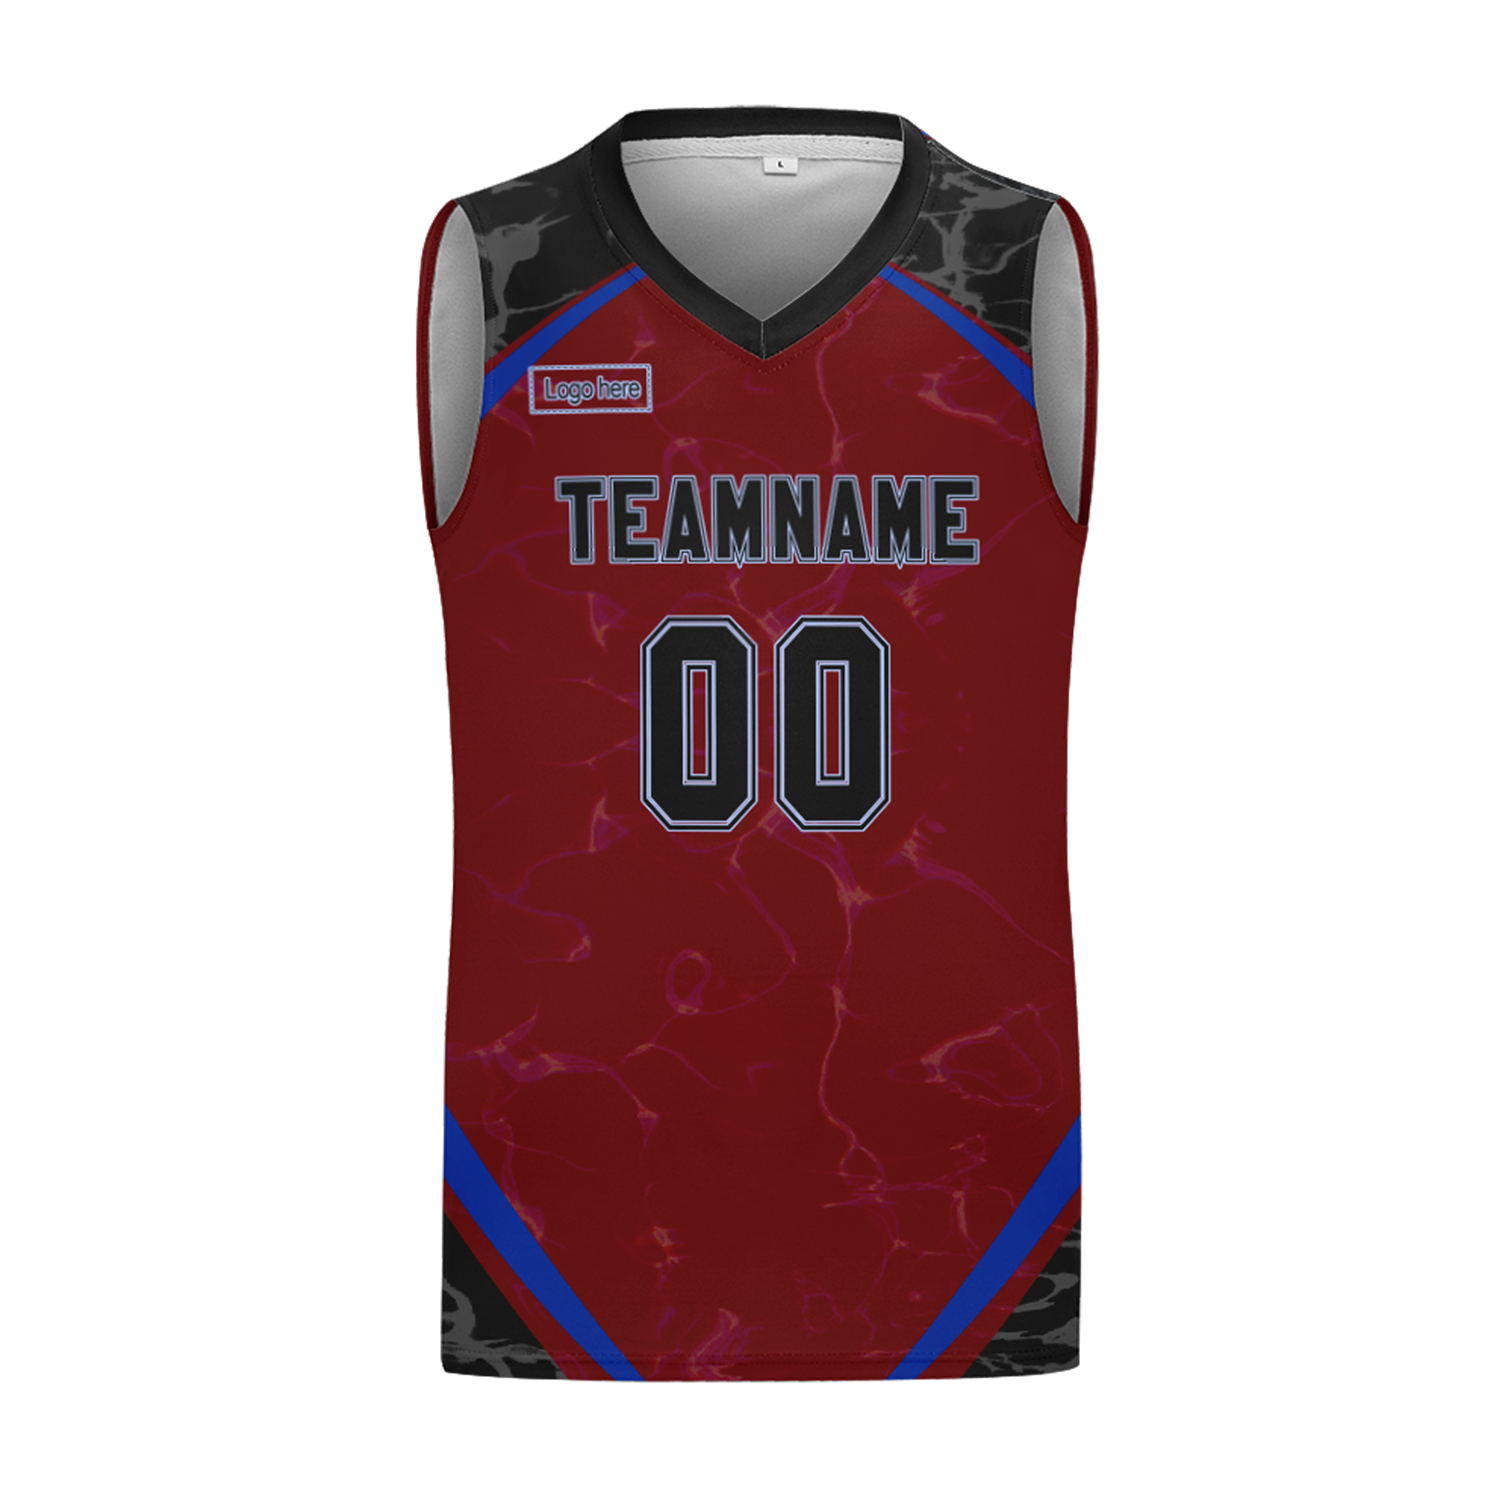 custom-basketball-jersey-personalized-printed-design-sports-basketball-uniforms-wholesale-team-basketball-suits-5